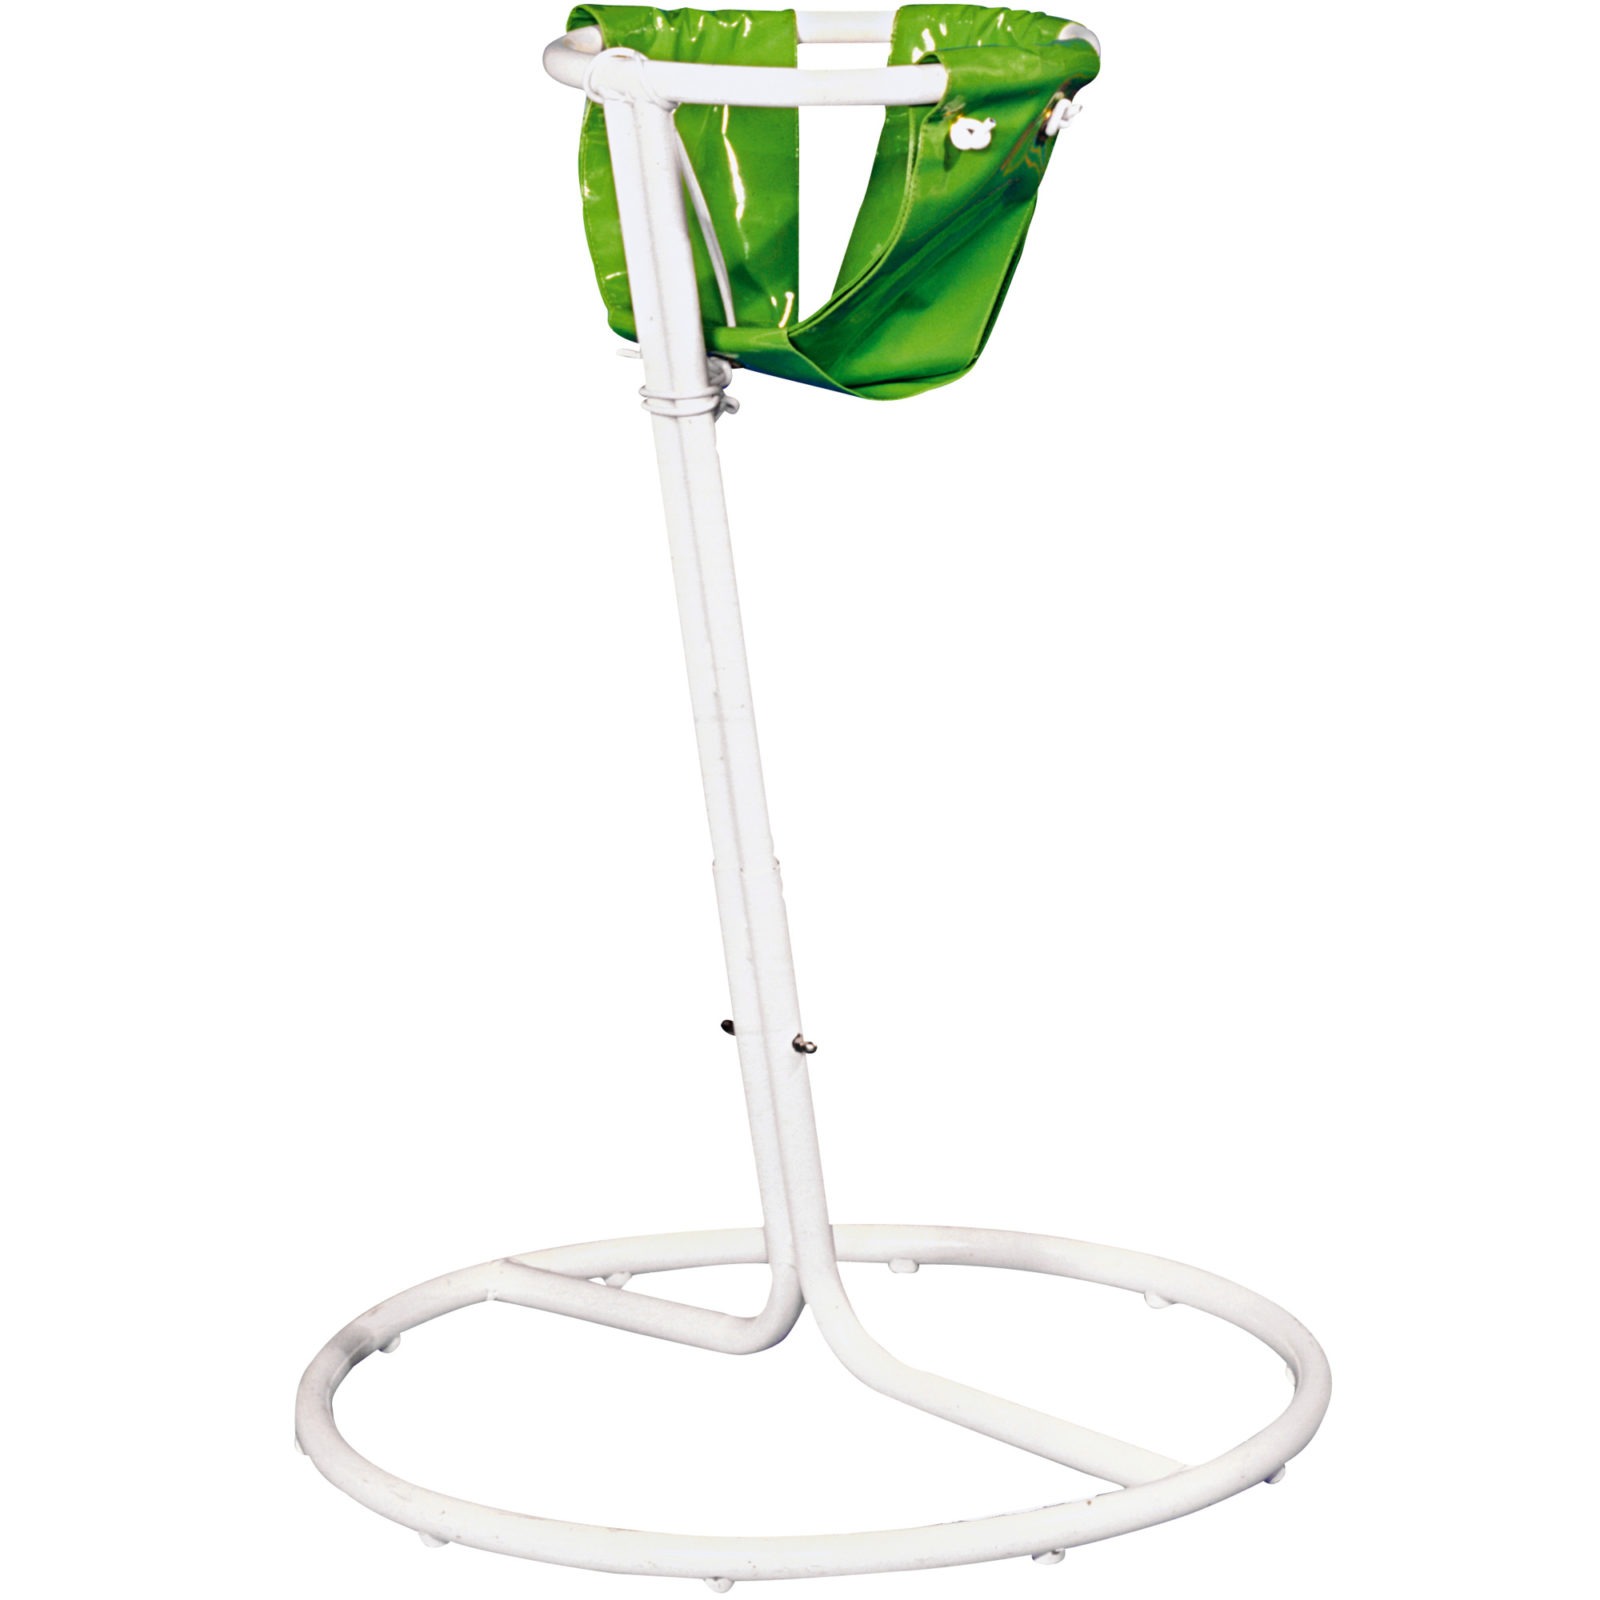 Children's high chair made of white metal and a plastic seat in green, DINO.